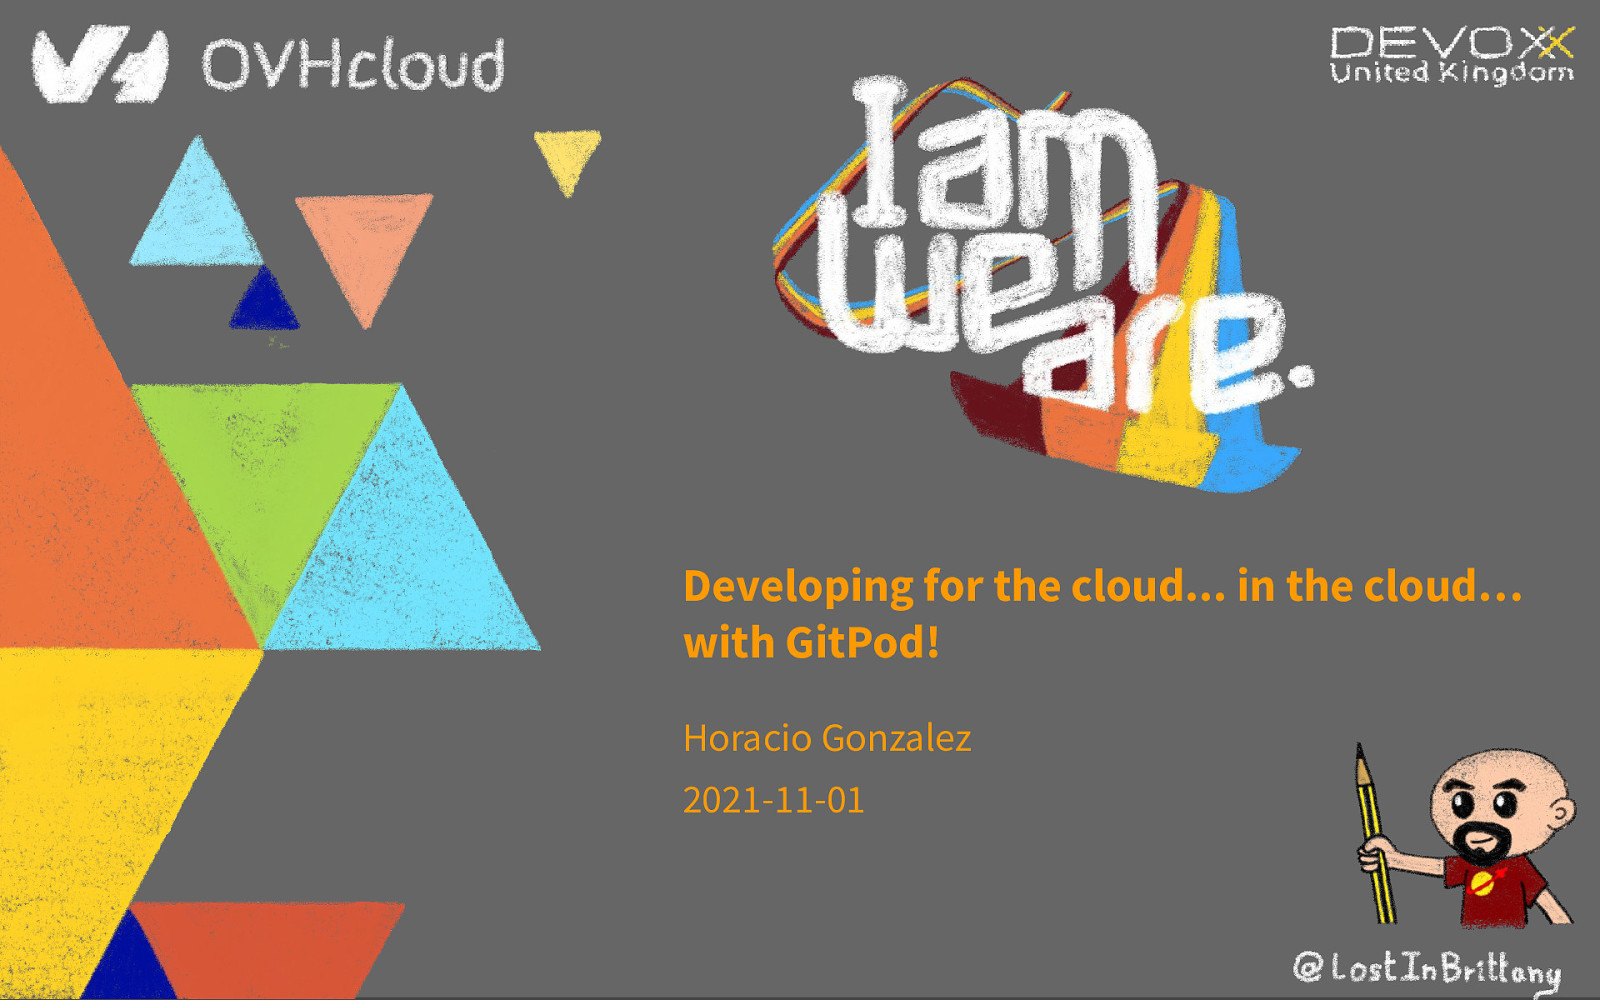 Developing for the cloud… in the cloud… with GitPod!